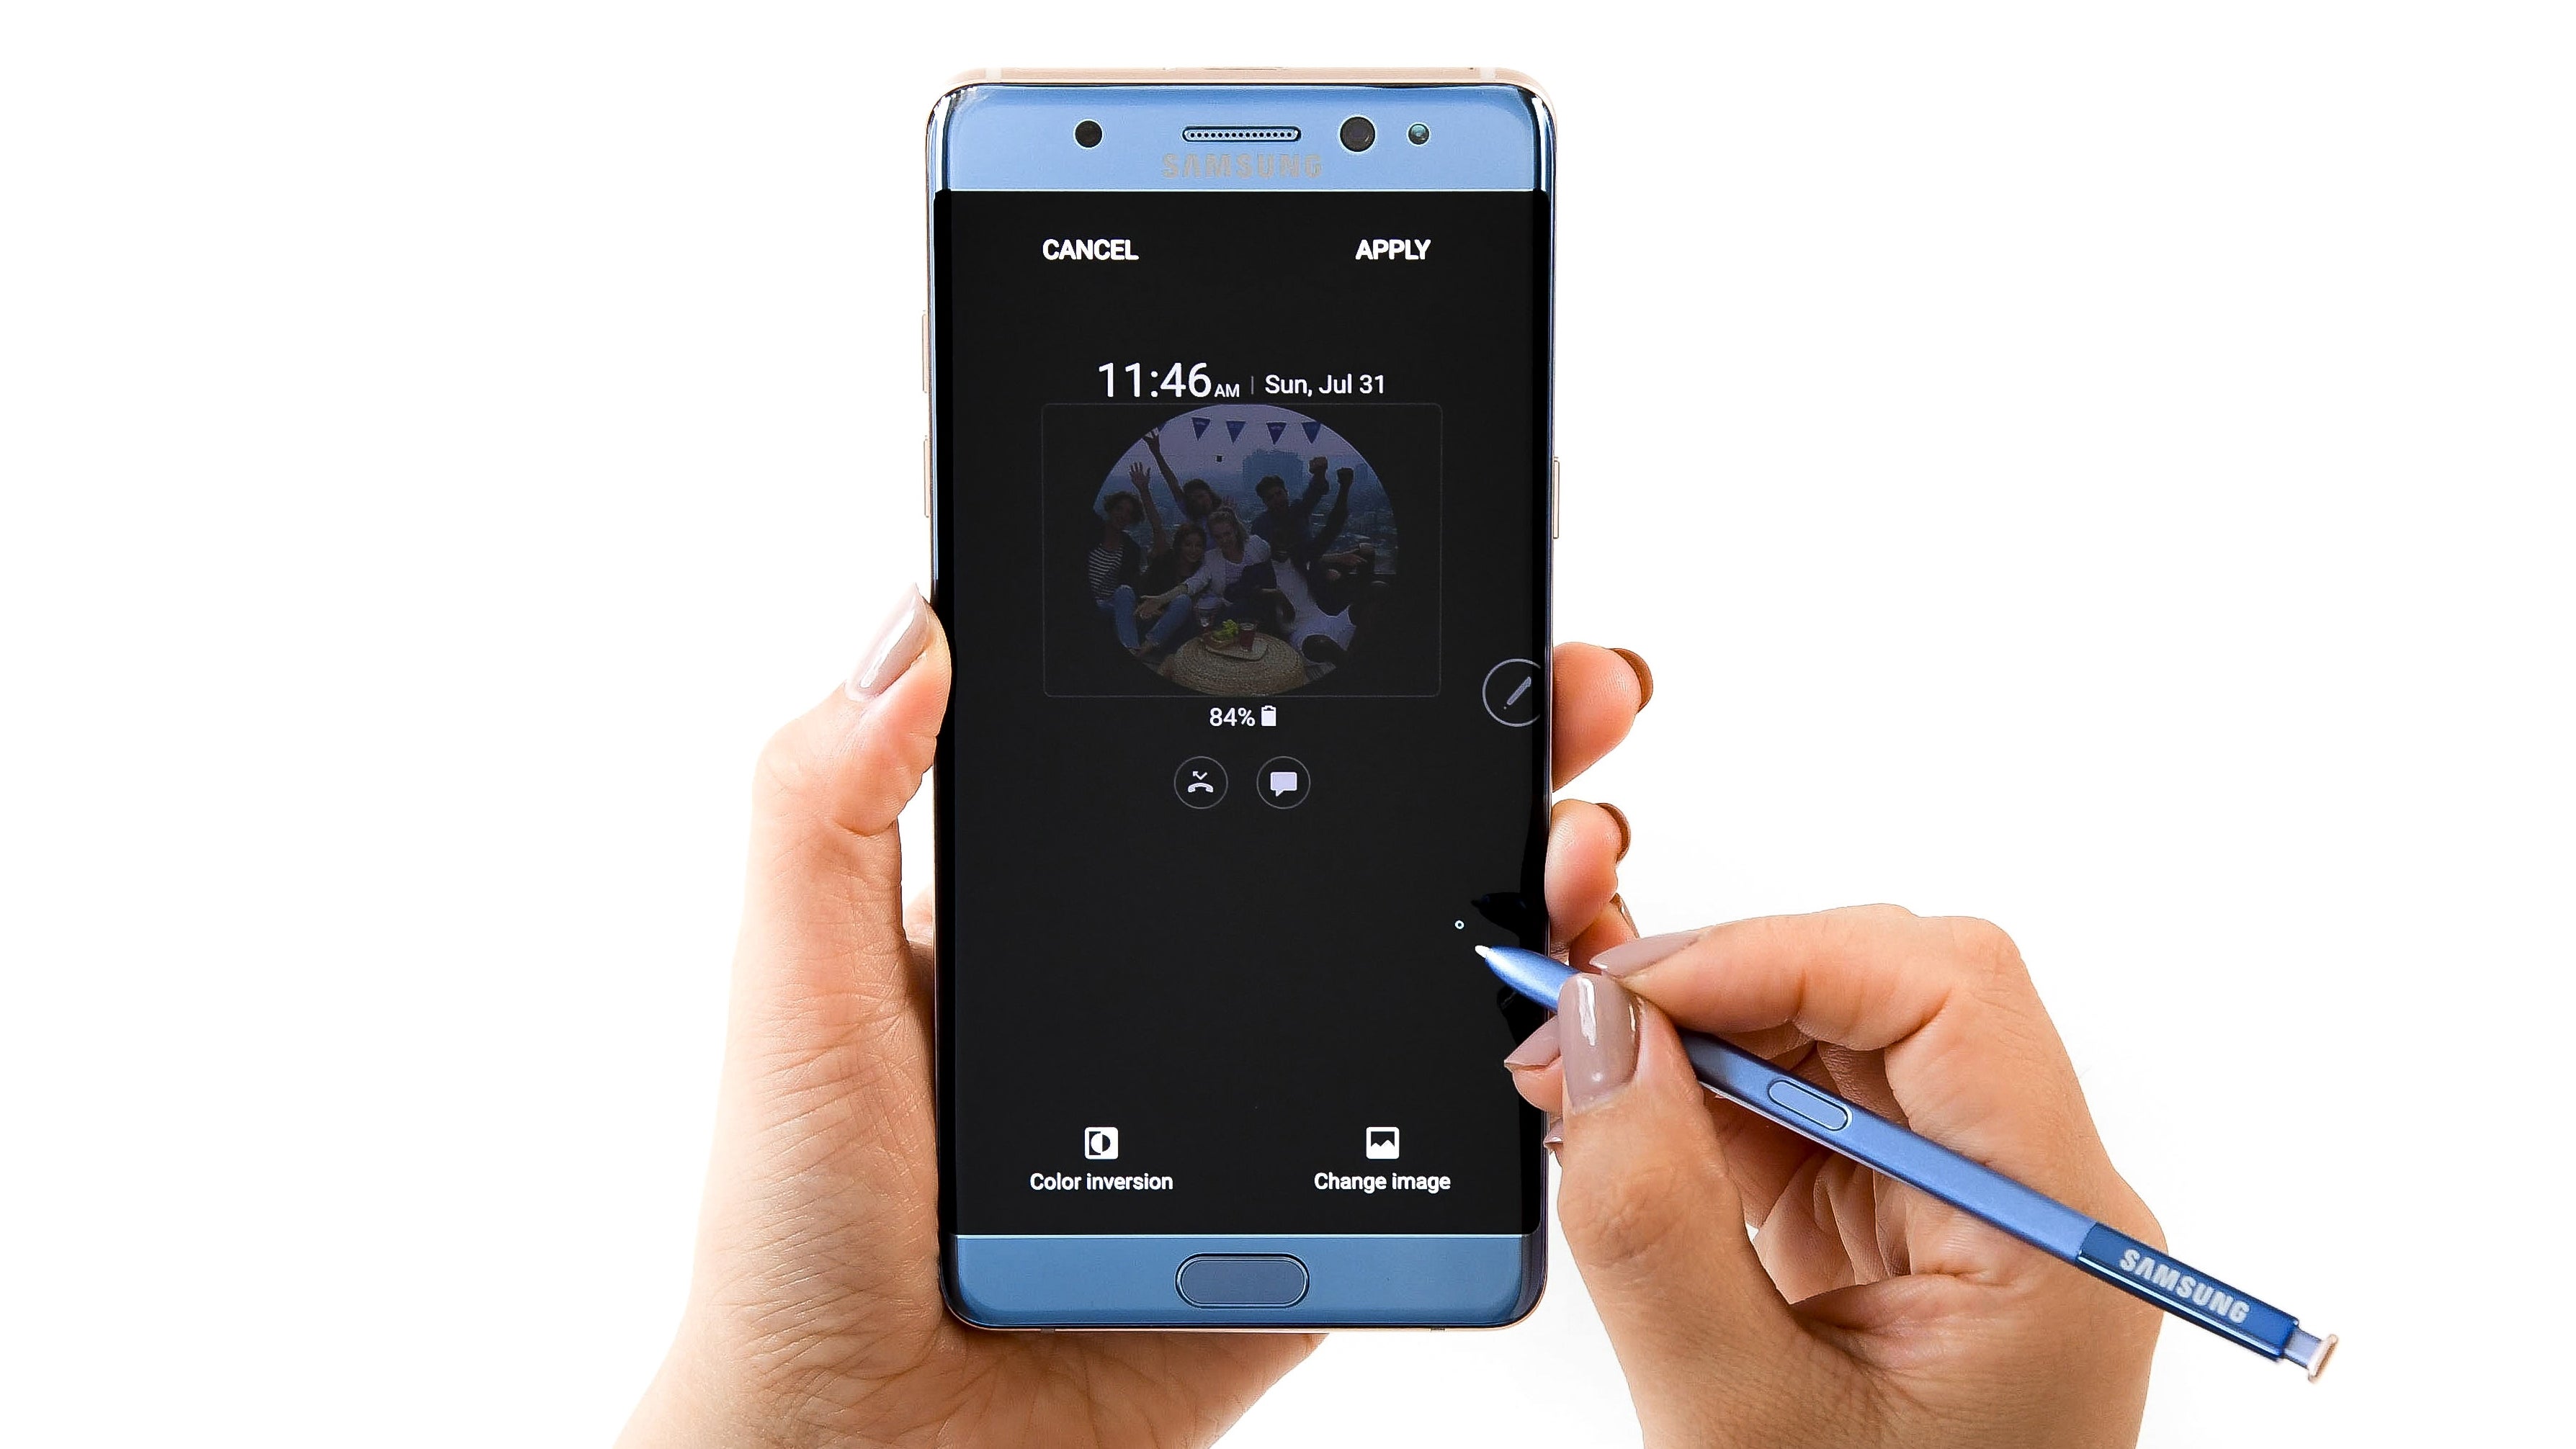 Note 7 S Pen - thinner tip, 4096 pressure levels, water resistance - Note the progress: the evolution of the Samsung S Pen from the original phablet to the Note 7